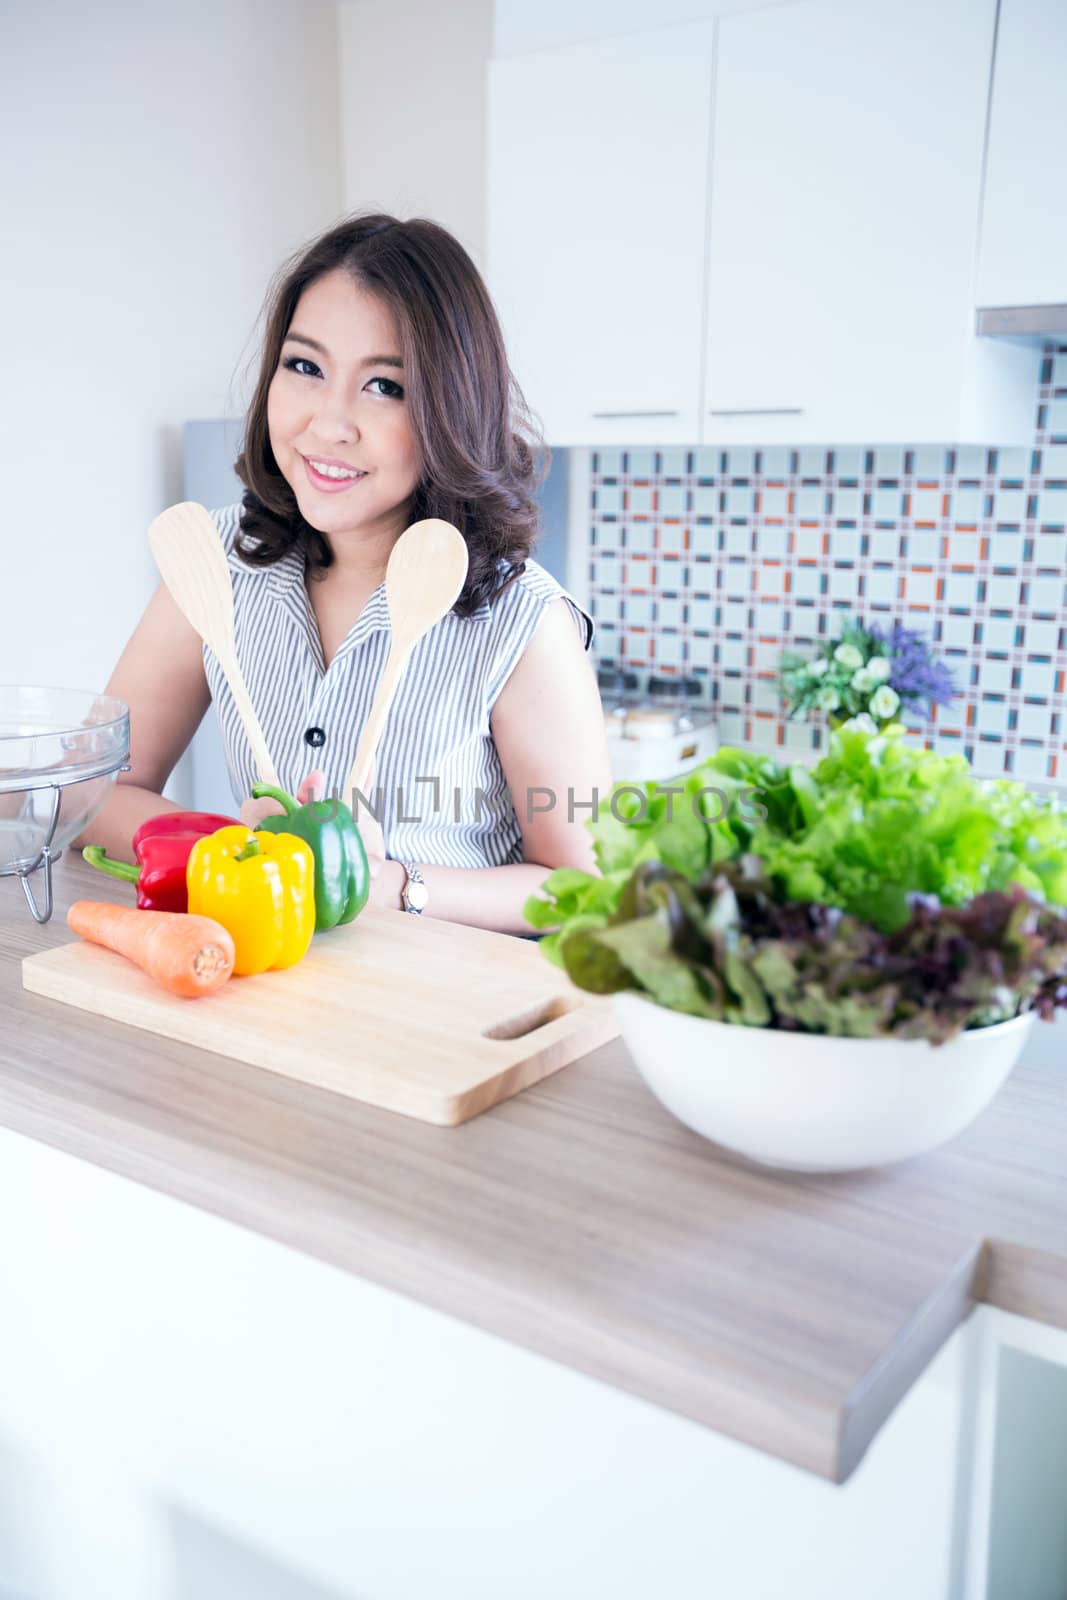 Portrait of beautiful relaxed young woman standing at the kitchen counter